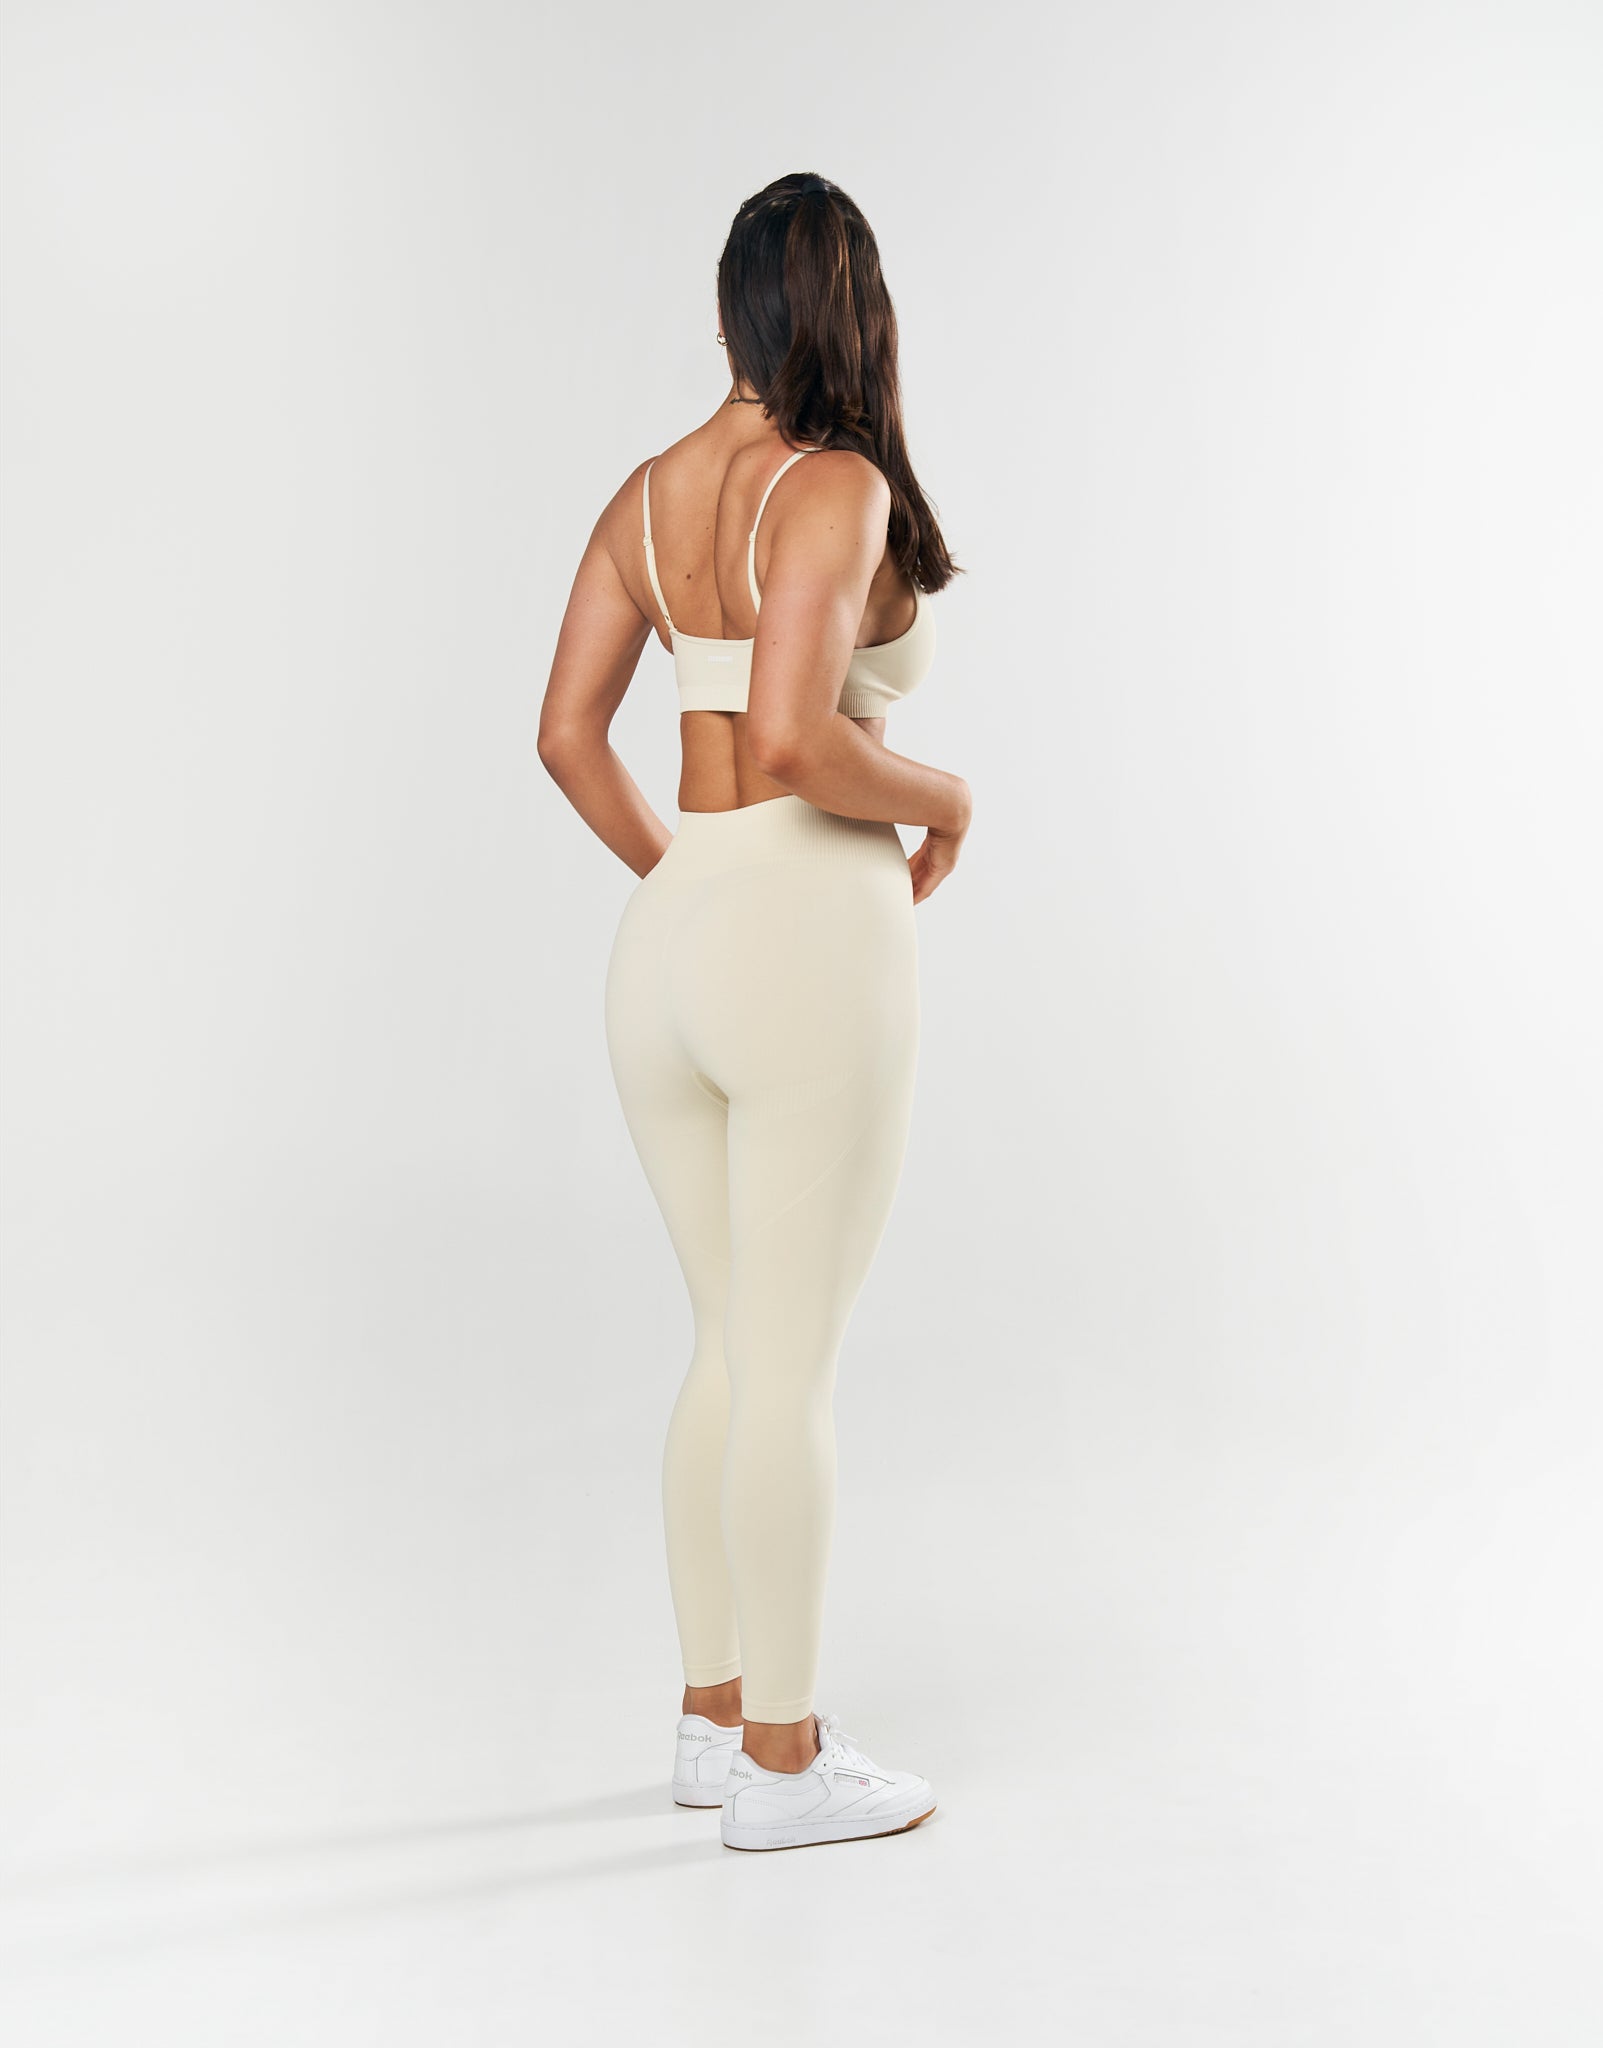 SL Seamless Full Length Tights - Butter